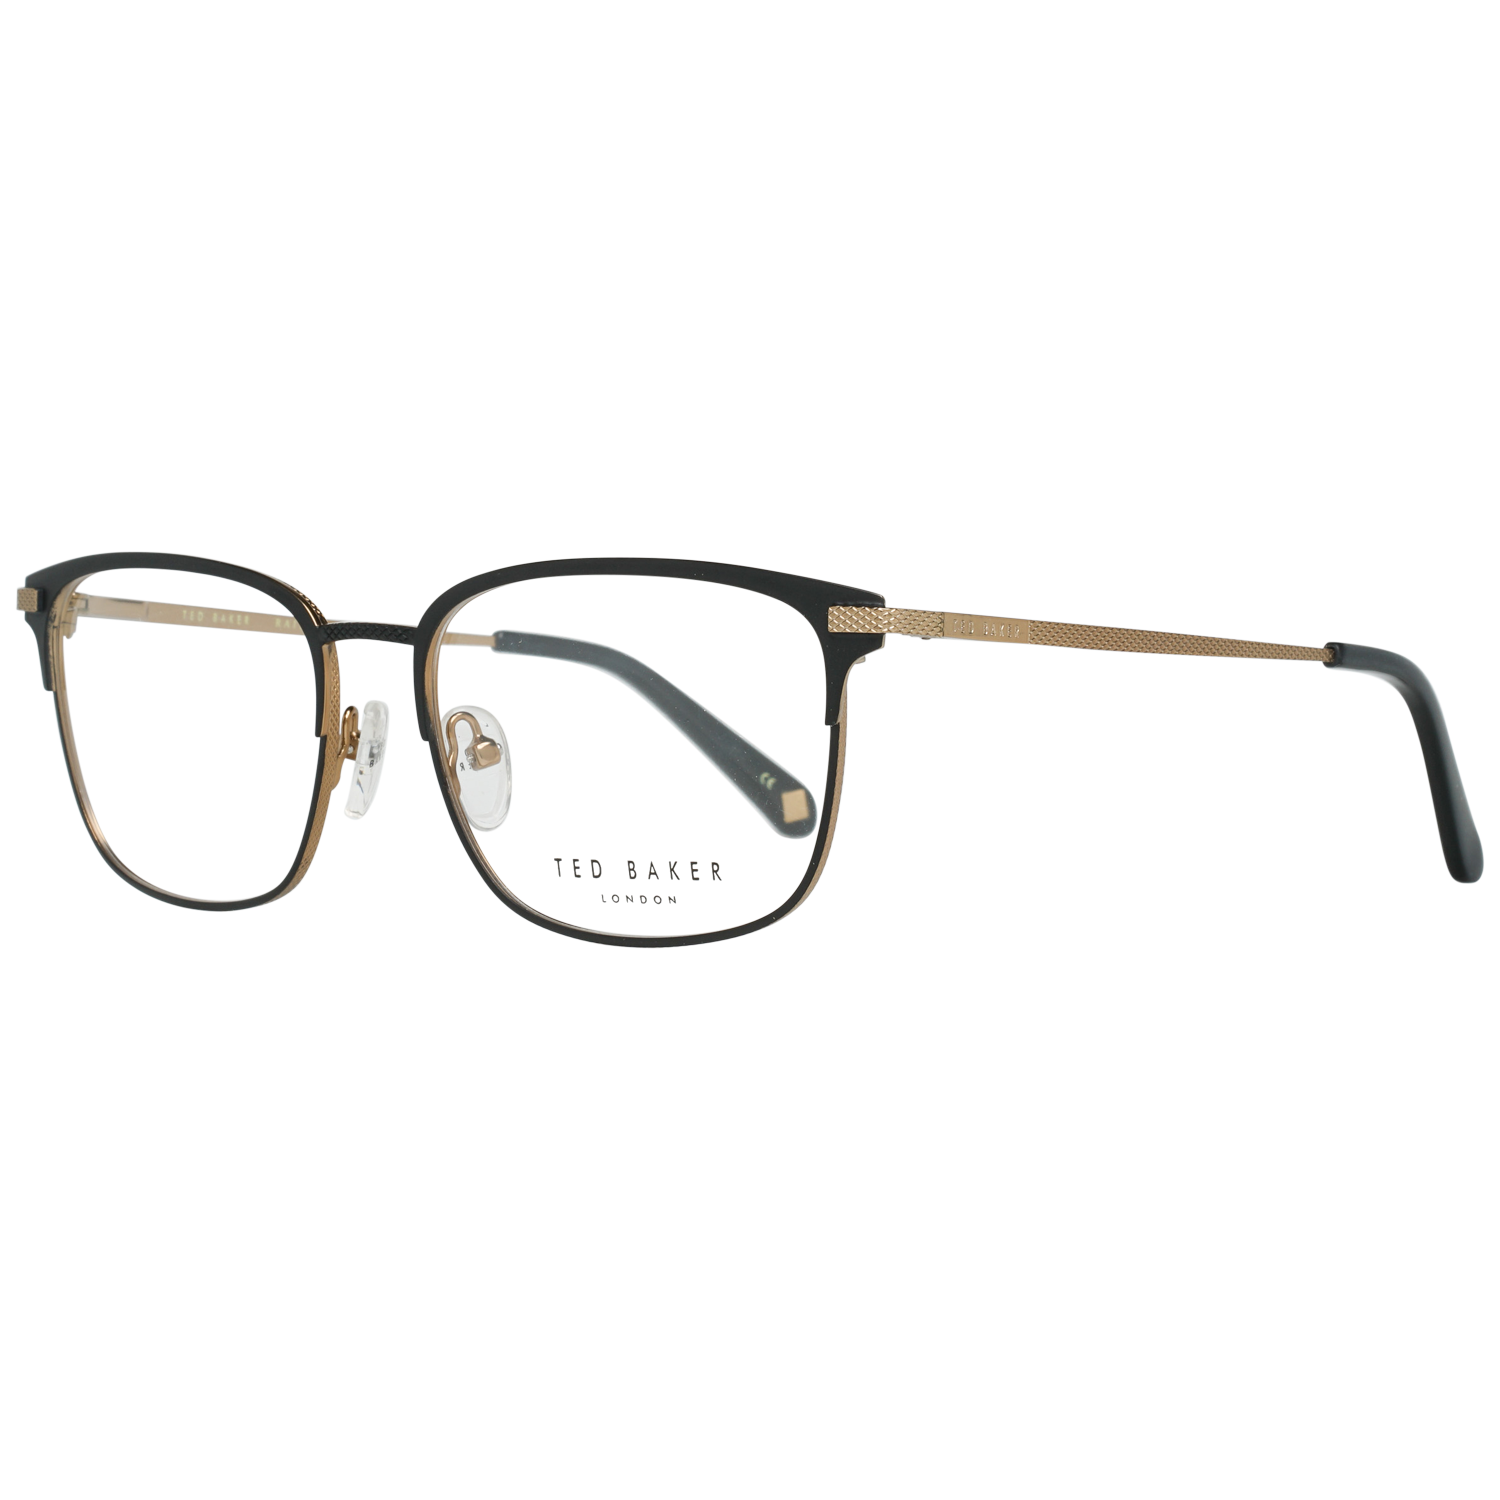 Ted Baker Optical Frame TB4259 003 54 Daley from category Frames